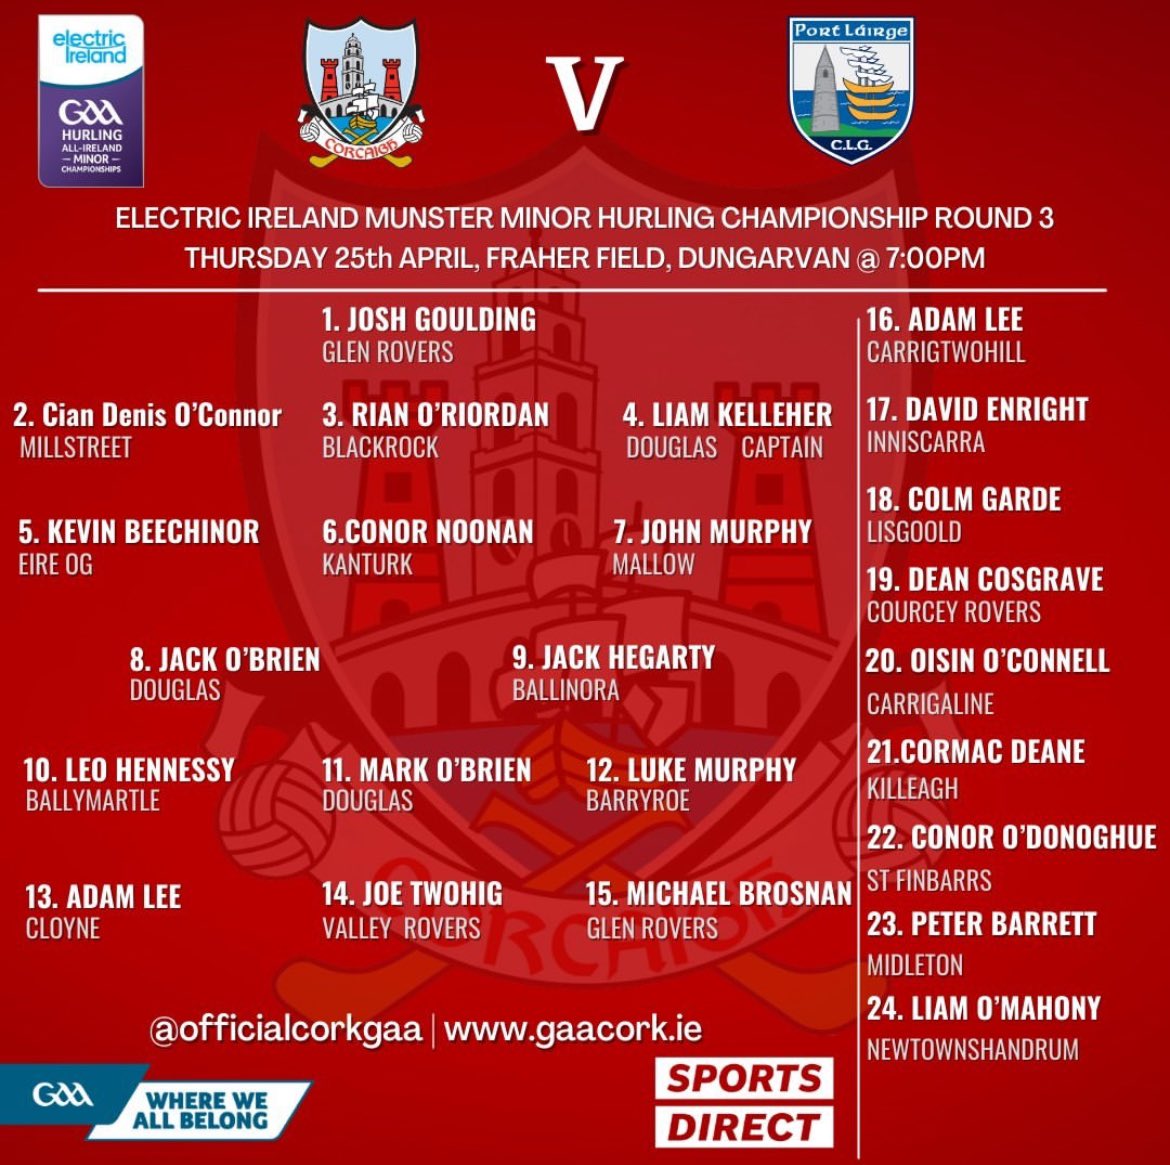 Best wishes to Rian and the Cork minors in Dungarvan on Thursday evening 🔴⚪️